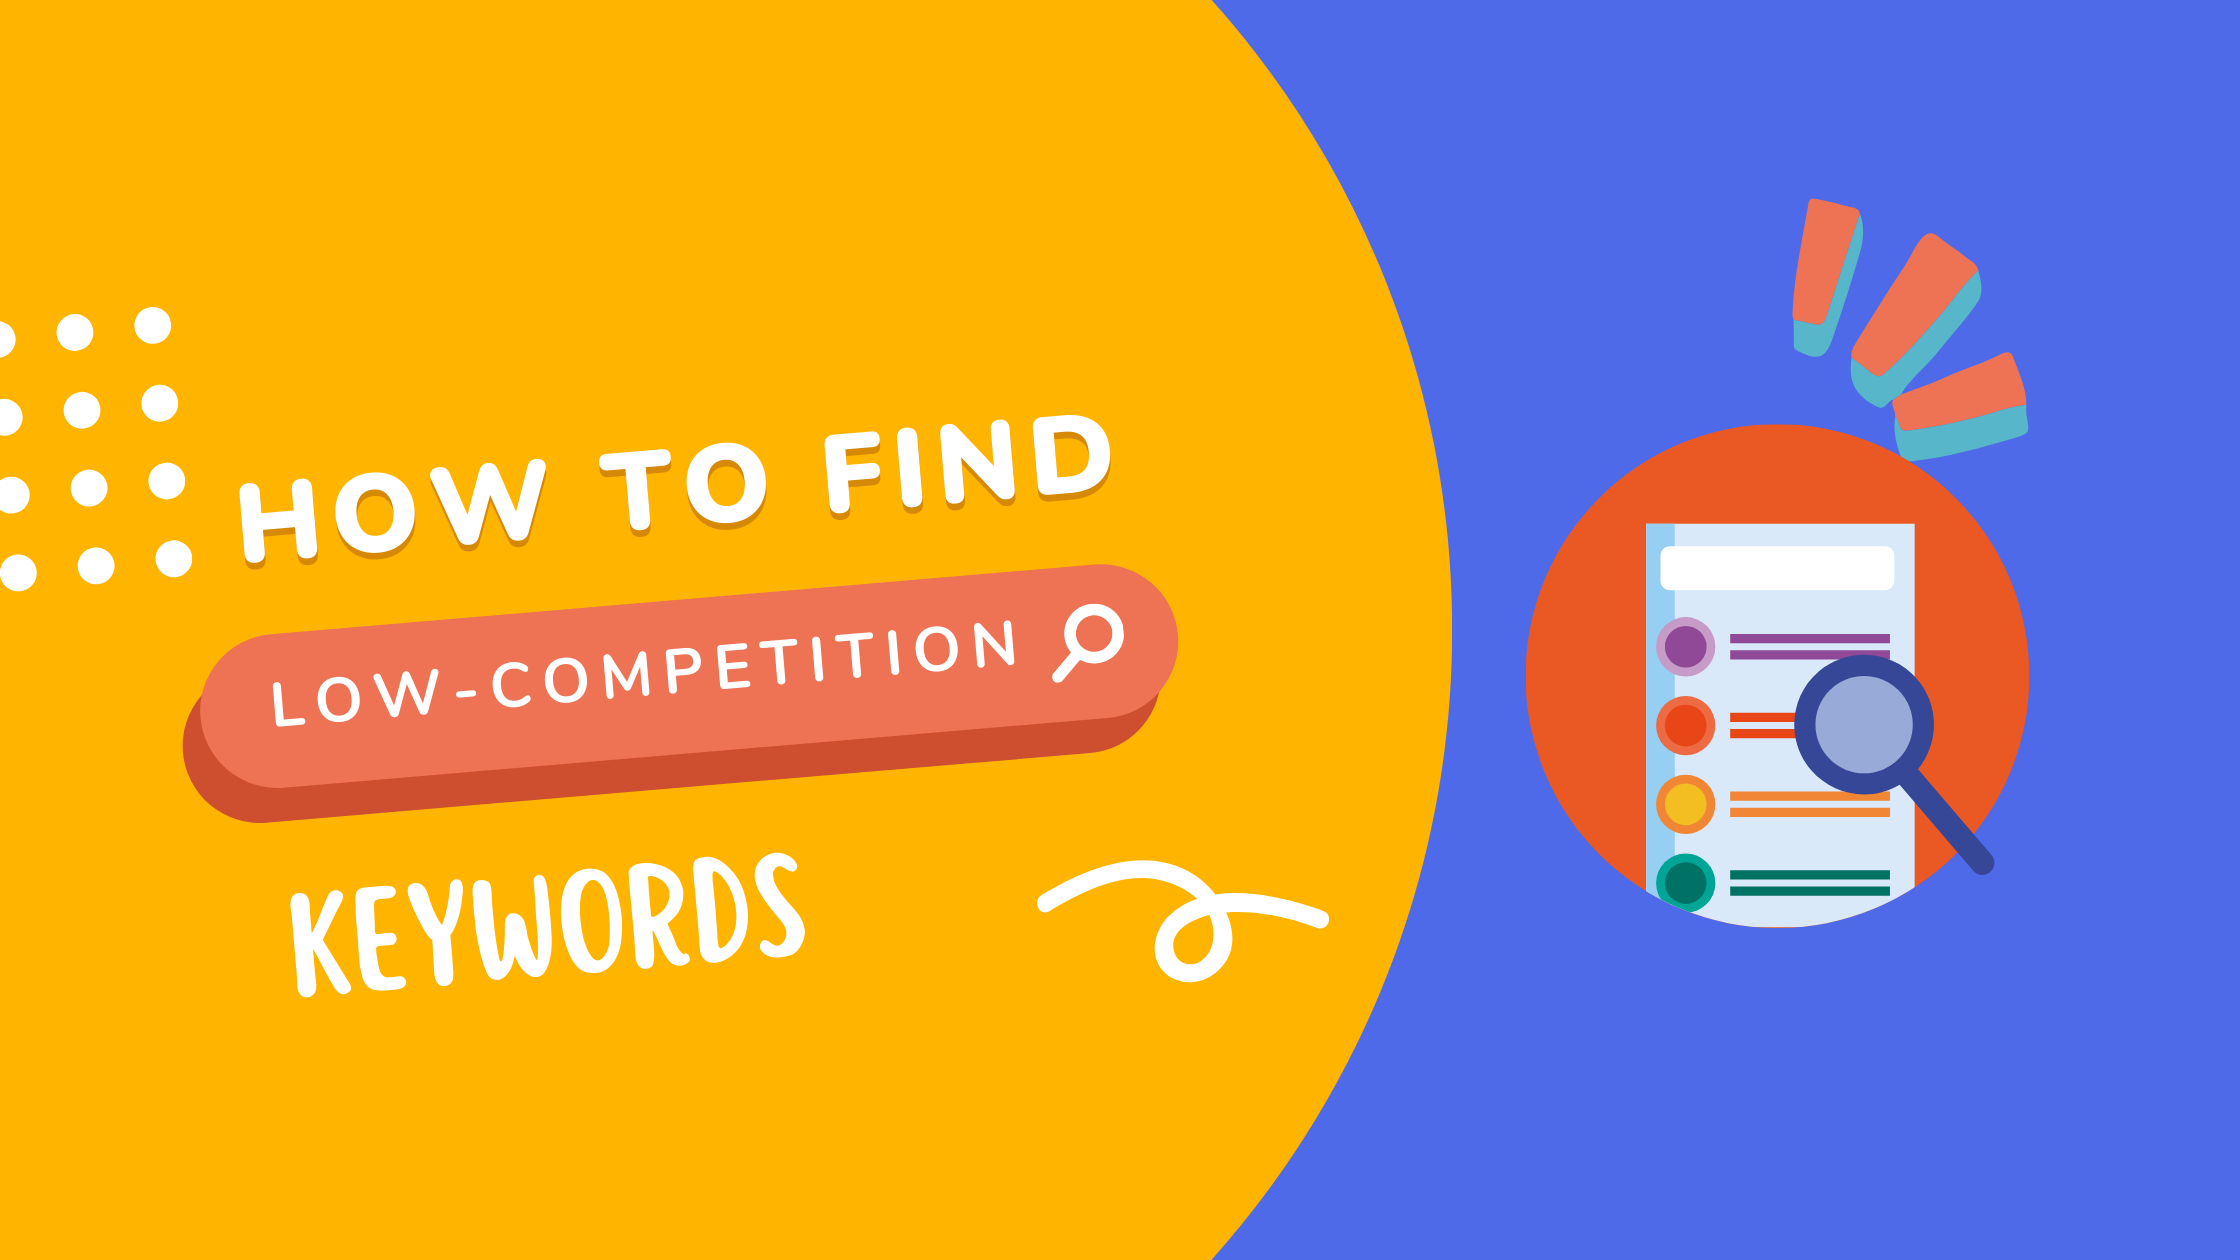 How-To-Find-Low Competition-Keywords-For-SEO